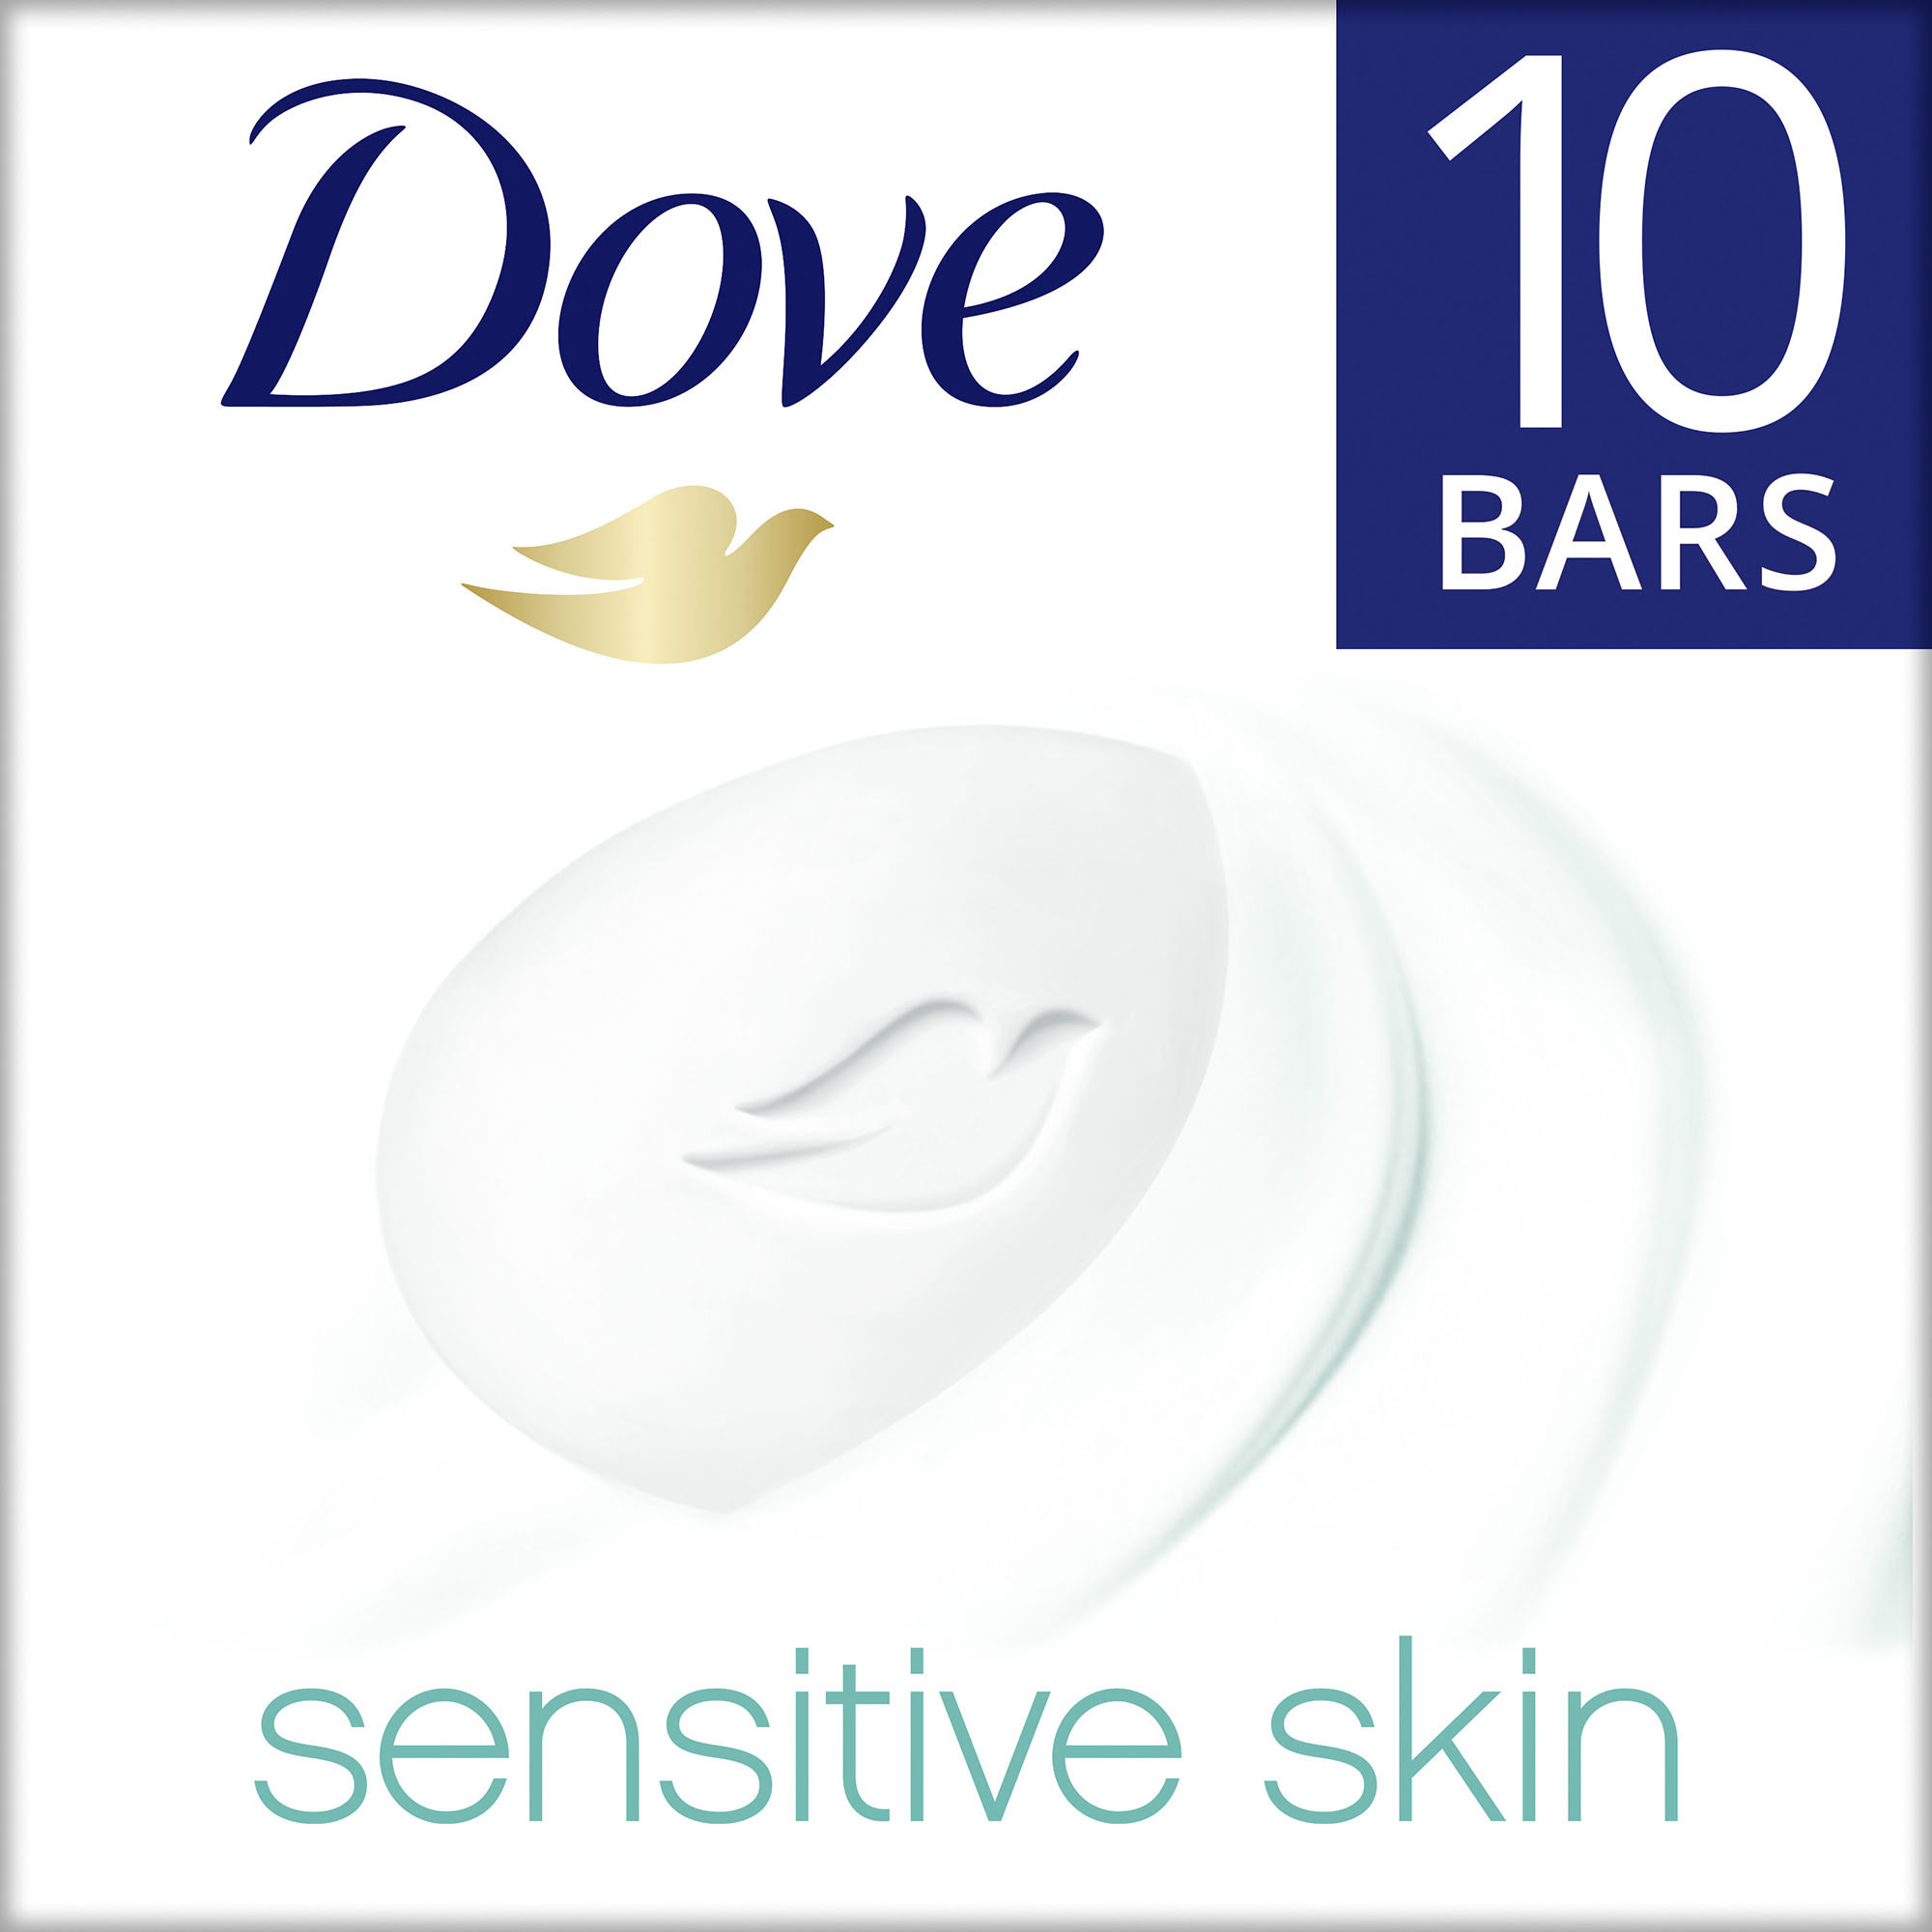 Dove Moisturizing Beauty Bar Sensitive Skin Effectively Washes Away Bacteria While Nourishing Your Skin for Softer Skin, Fragrance-Free, Hypoallergenic Beauty Bar 3.75 oz, 10 Bars - image 1 of 10